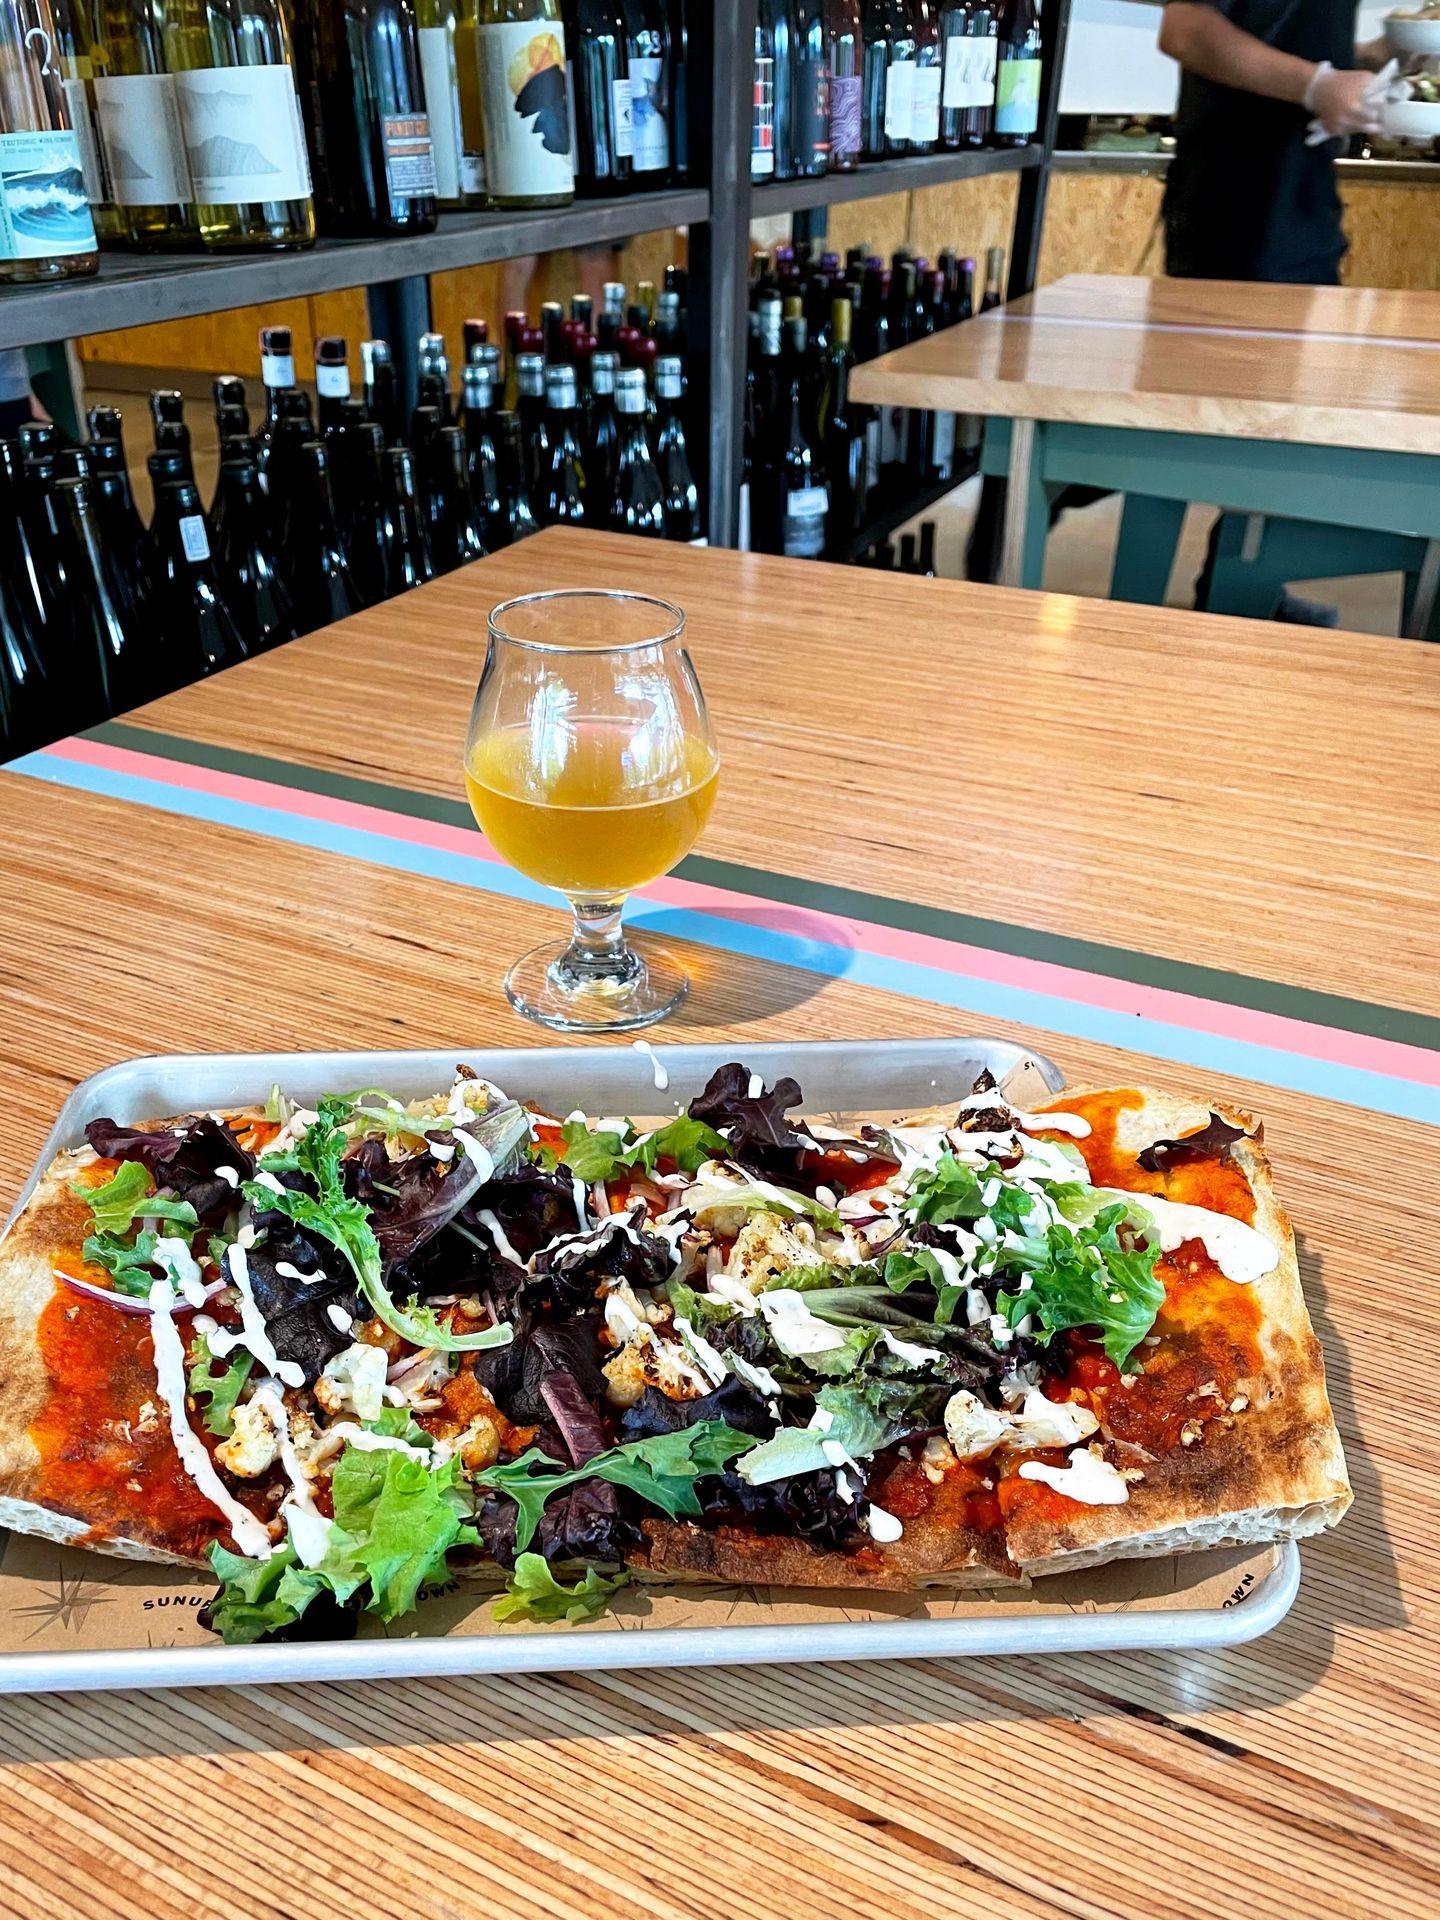 A flat bread pizza with tomato sauce and greens. It sits on a table that is wood with a pink, green and blue stripe. A glass of beer sits on the table.